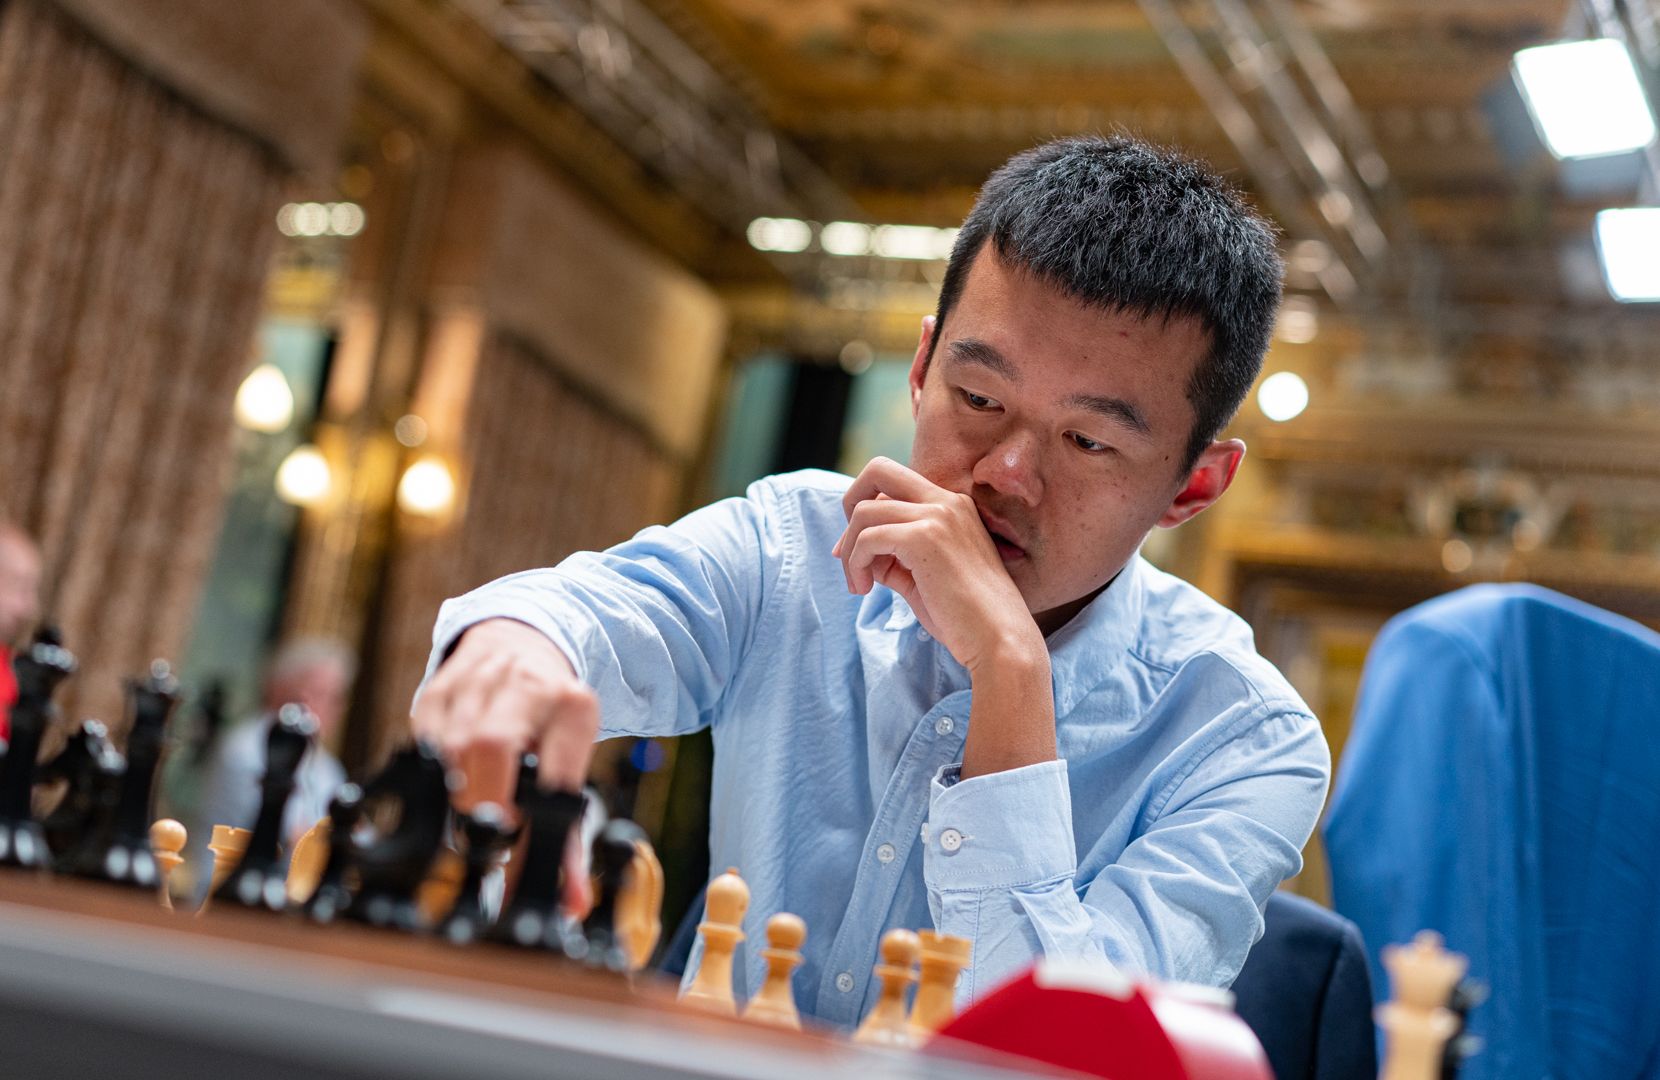 2022 FIDE Candidates, Will Ding Liren Move Into Striking Distance Of Nepo  For FIRST?